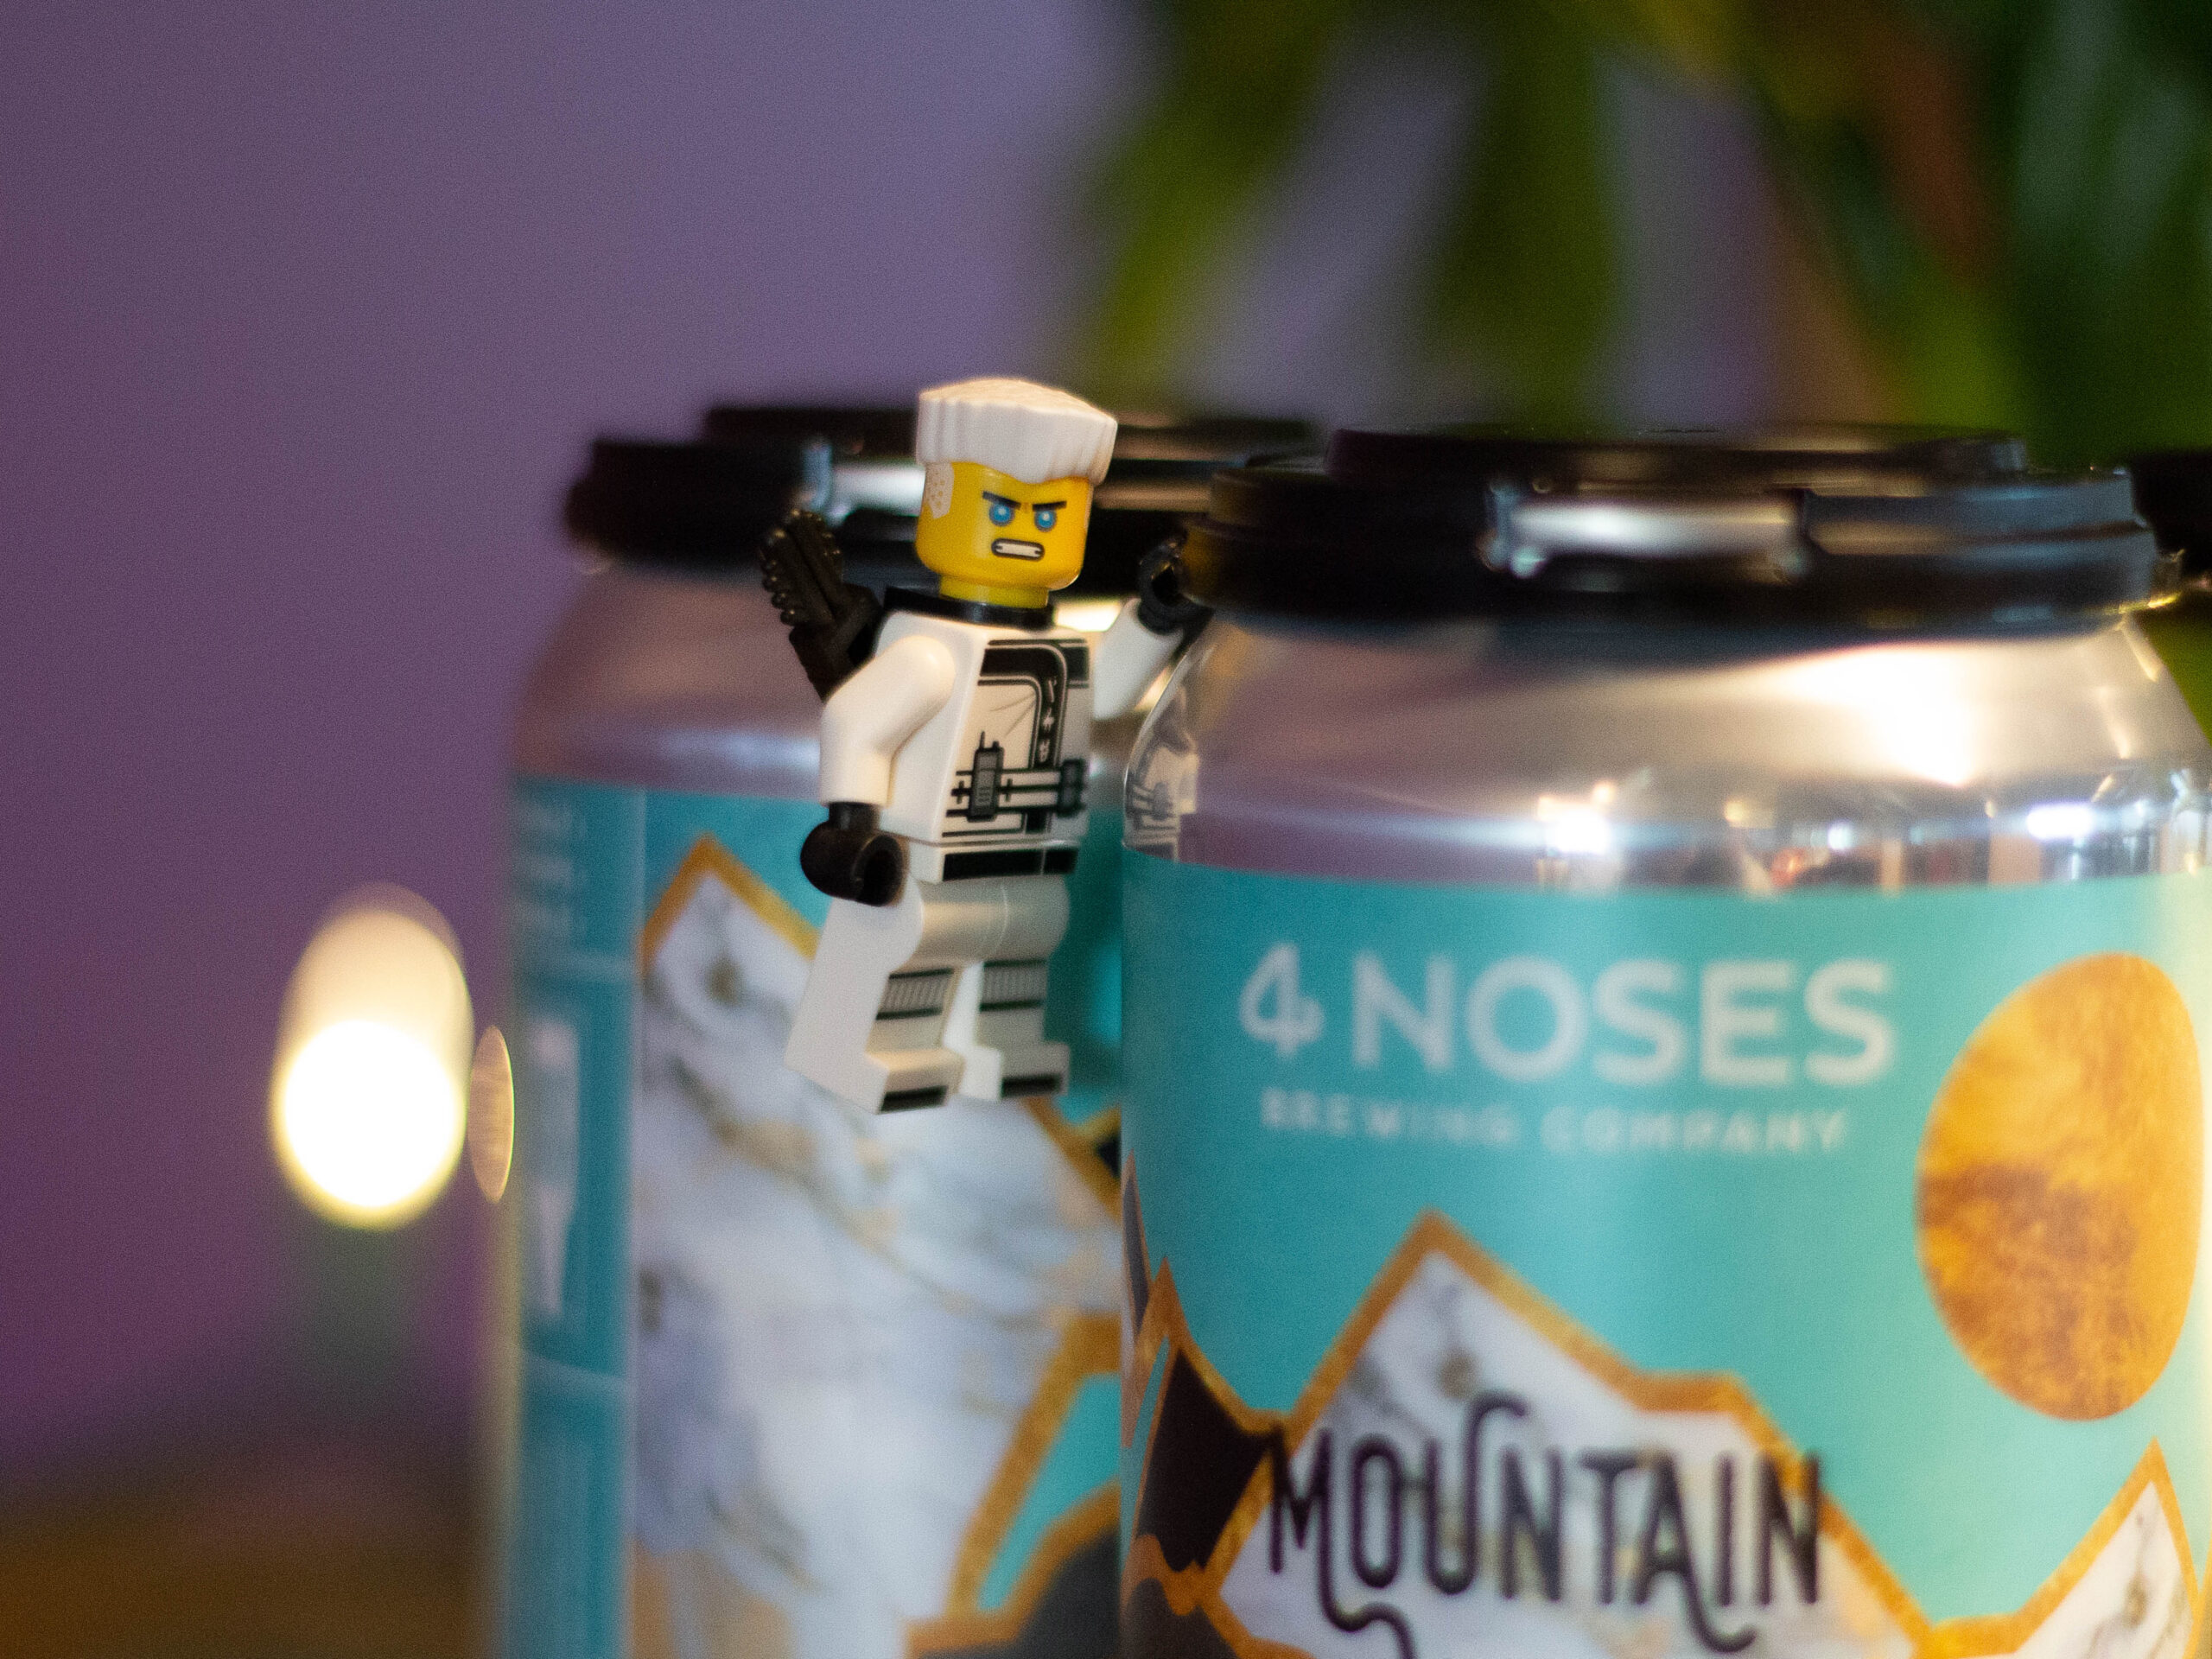 Lego figure climbing on beer caps from 4 Noses Brewing Company